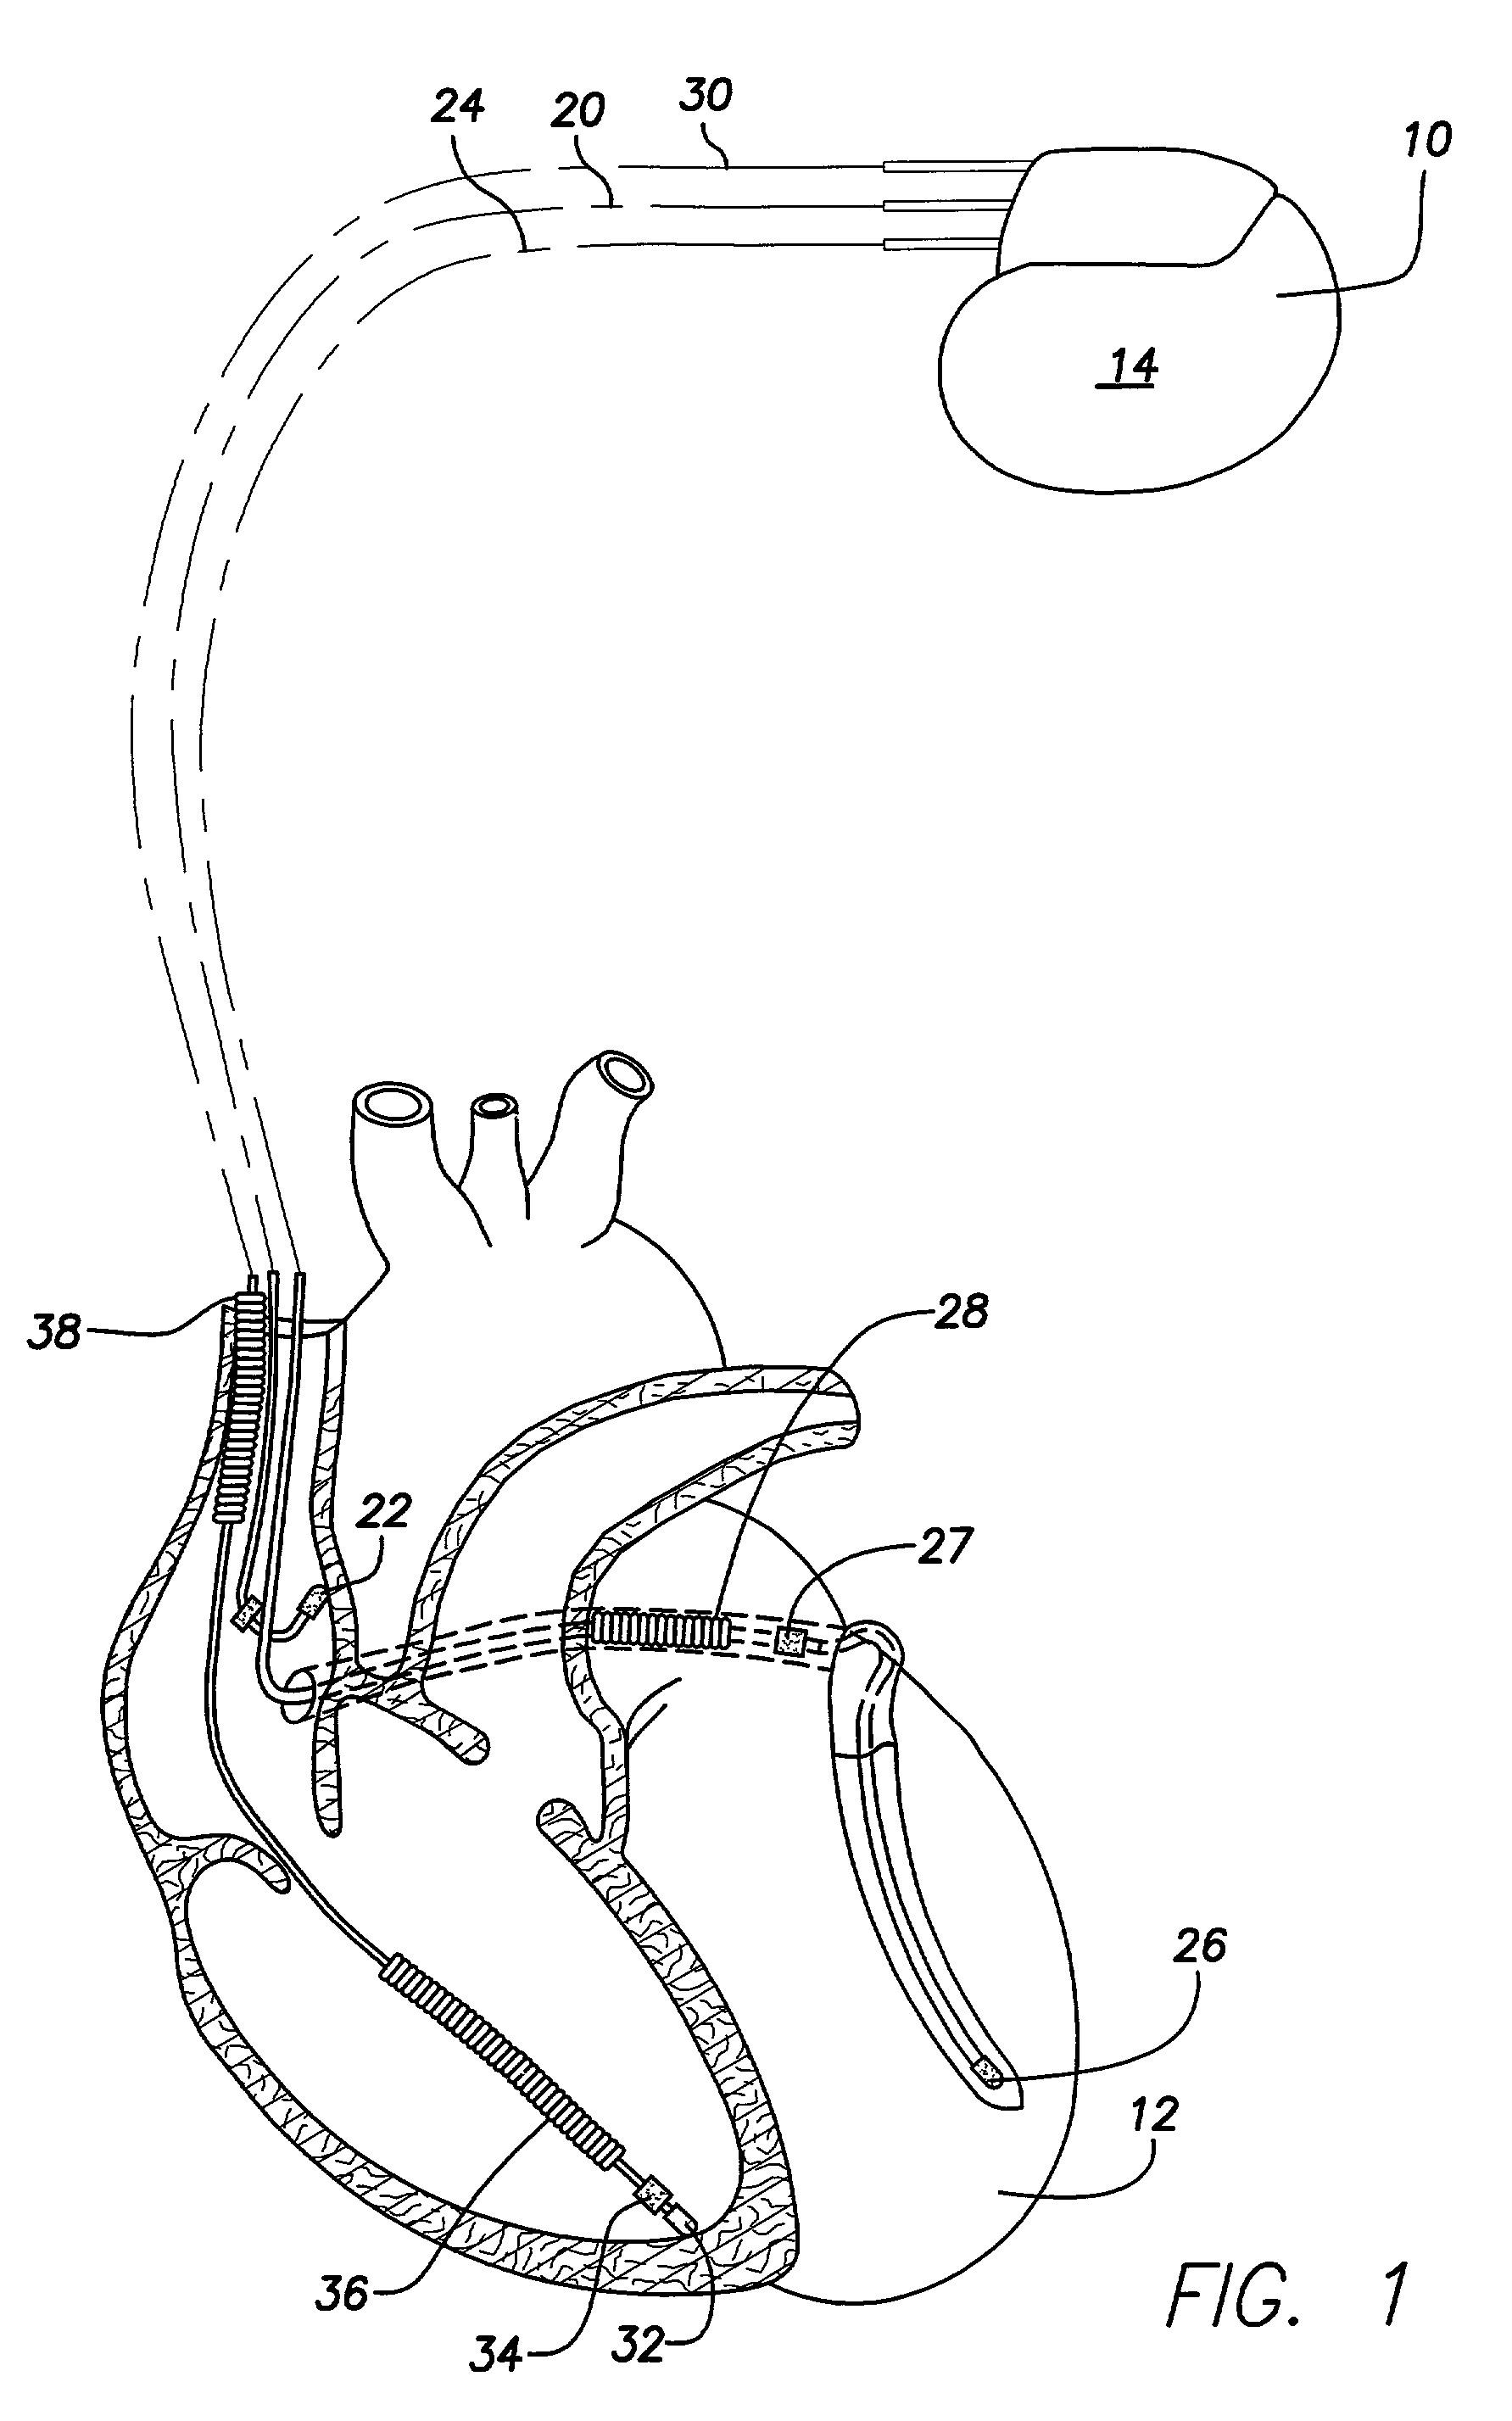 Implantable medical device construction using a flexible substrate